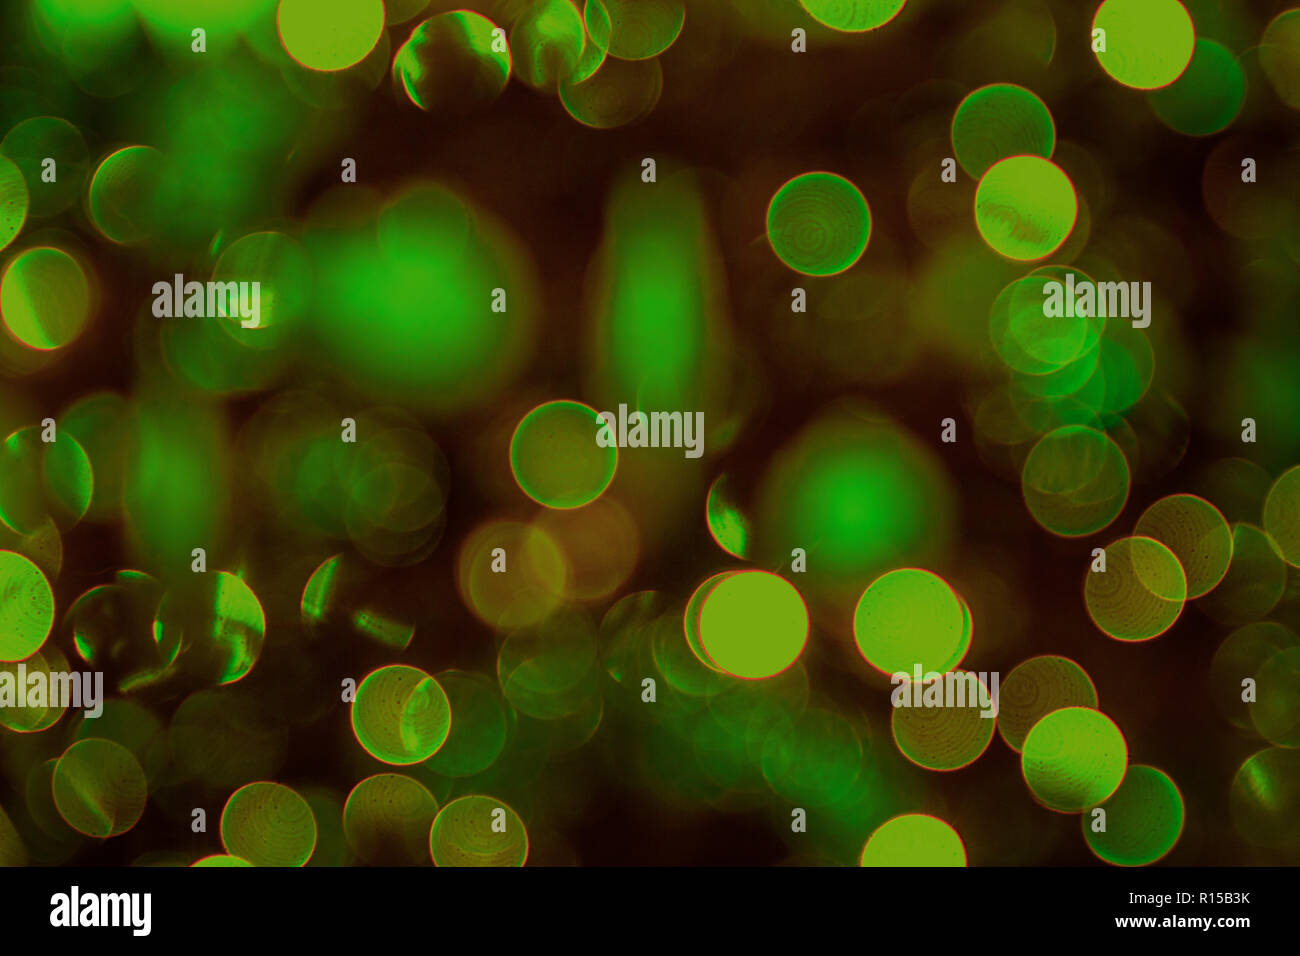 Christmas background of green lights Stock Photo